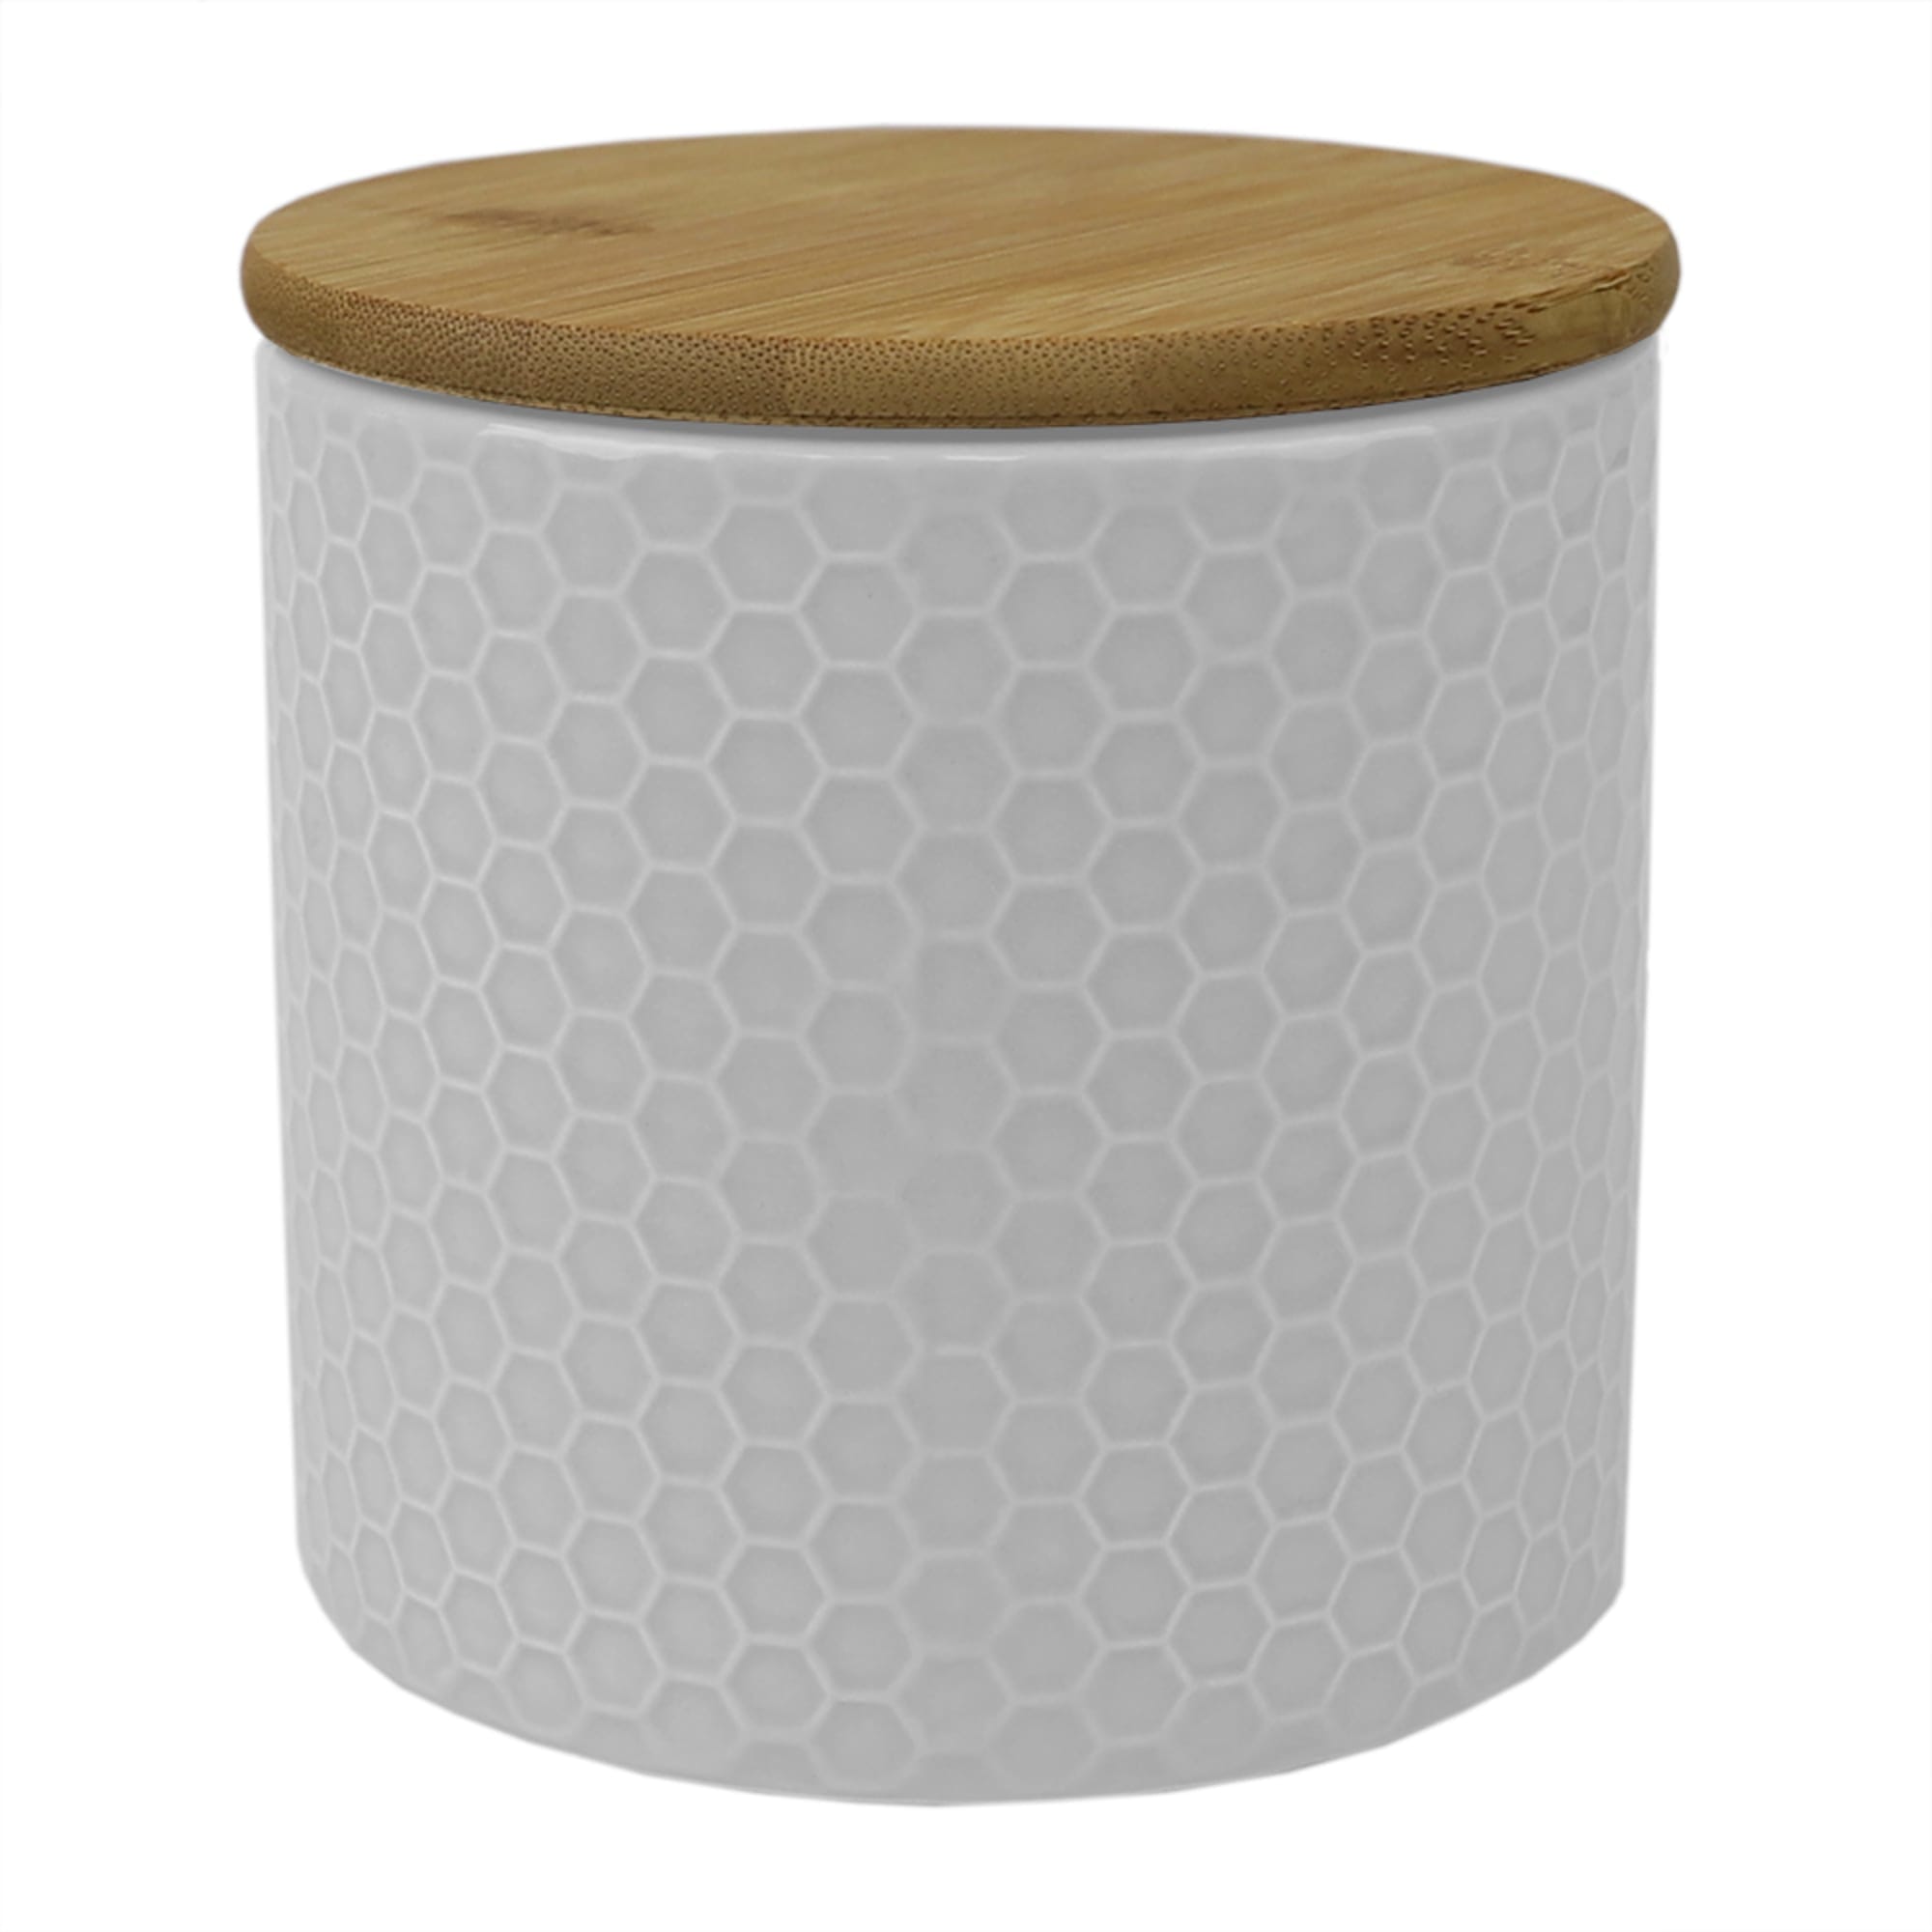 Home Basics Honeycomb Small Ceramic Canister, White $5 EACH, CASE PACK OF 12